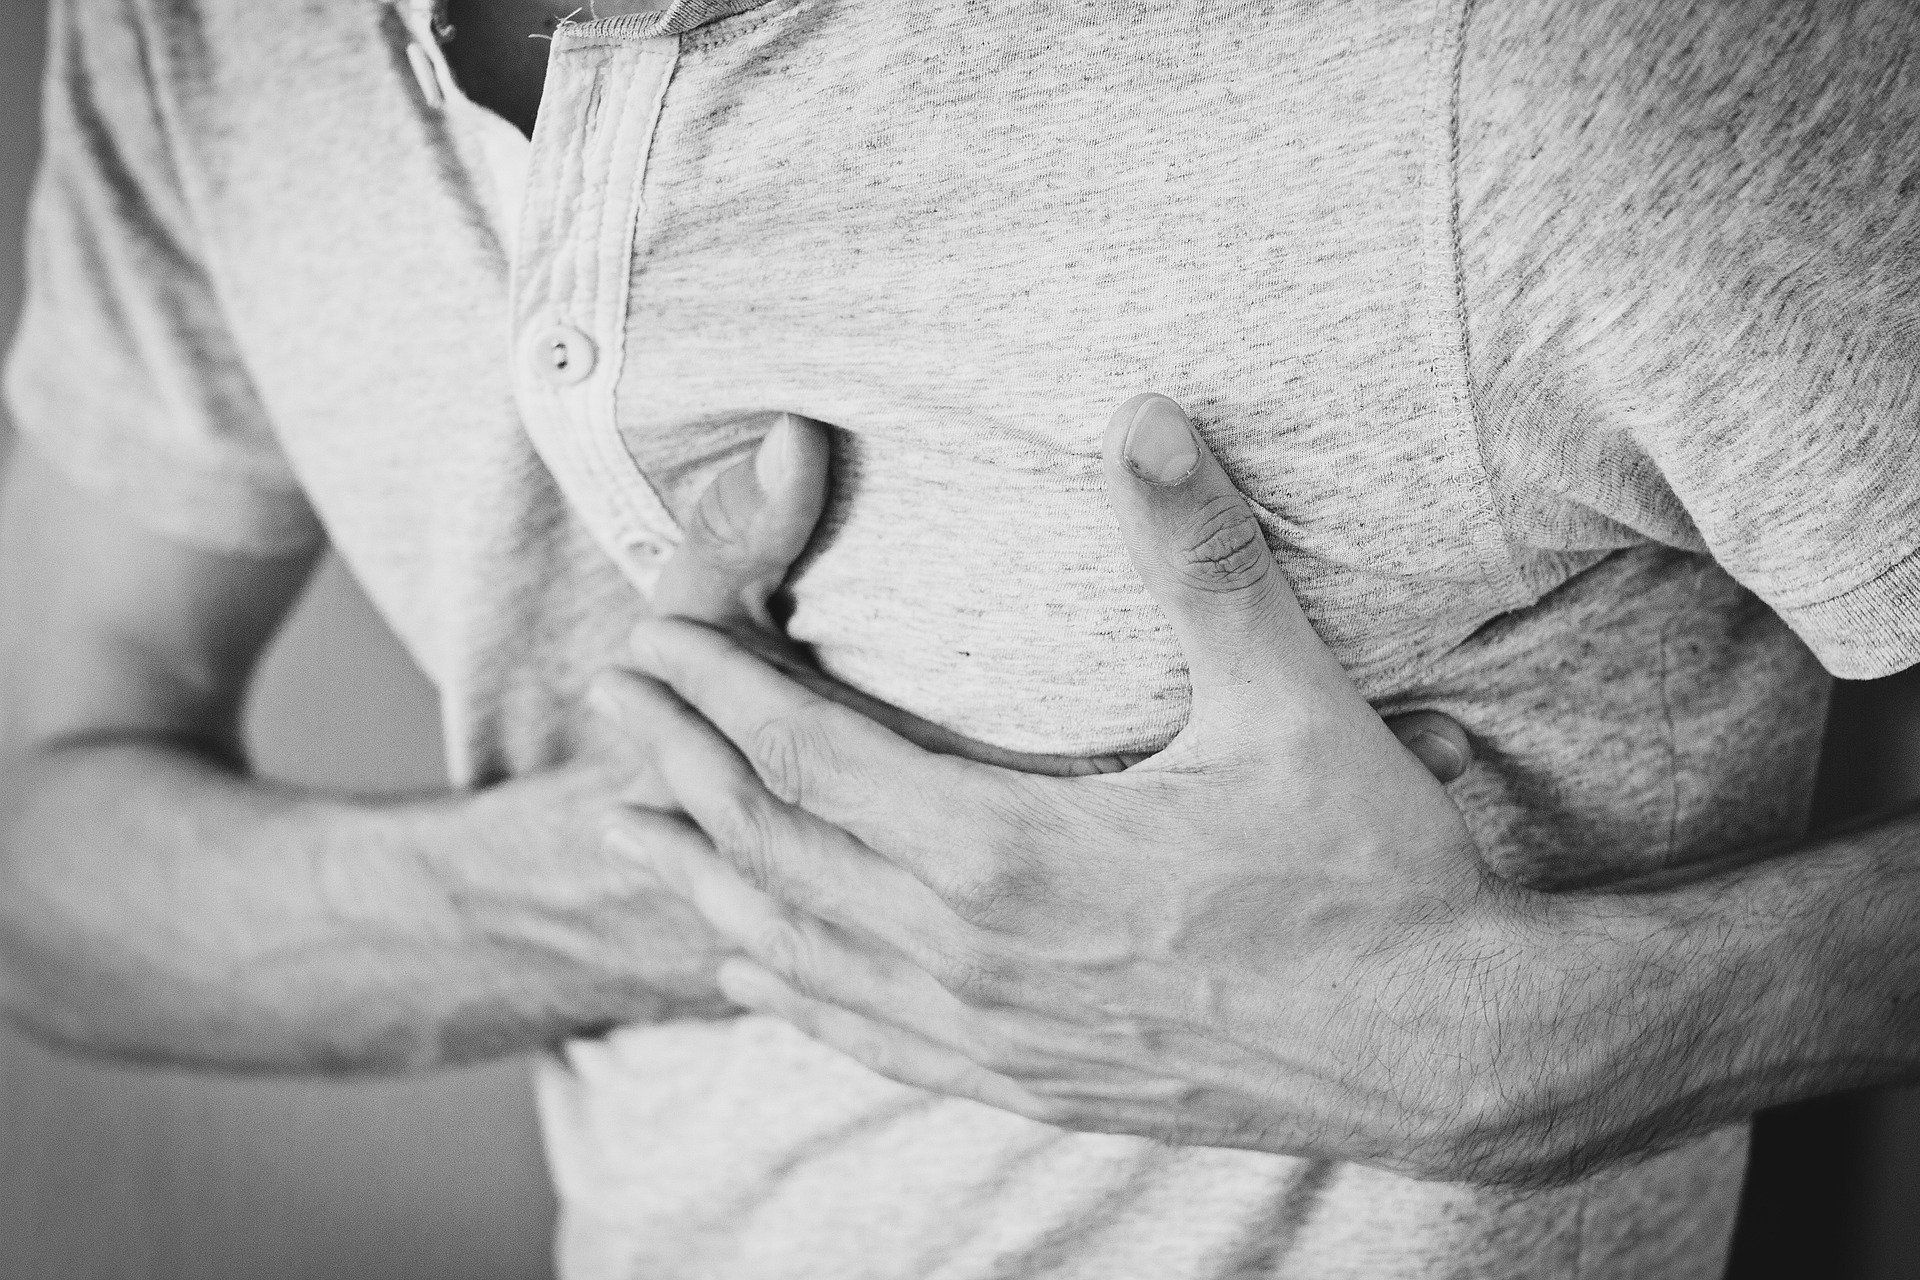 Protein biomarkers help reveal people at risk of heart complications